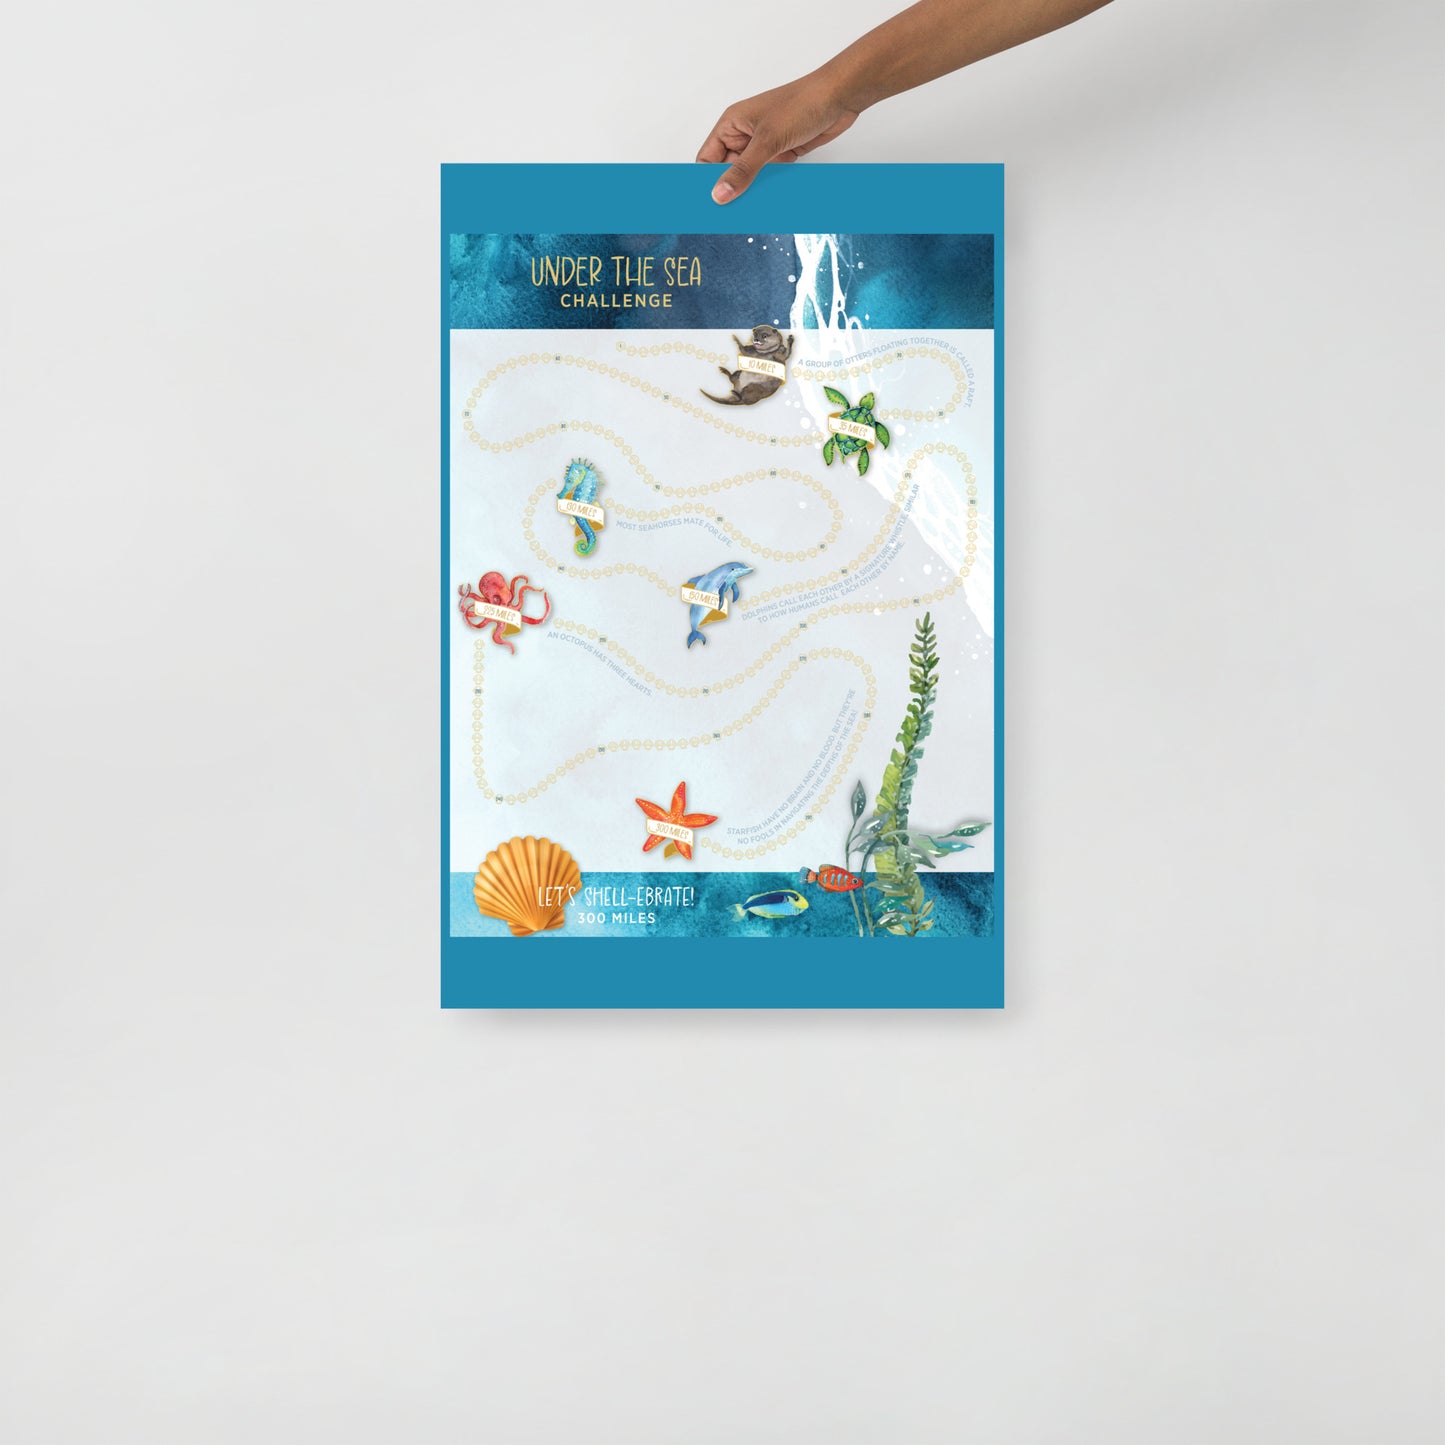 Under The Sea Challenge Tracker Poster